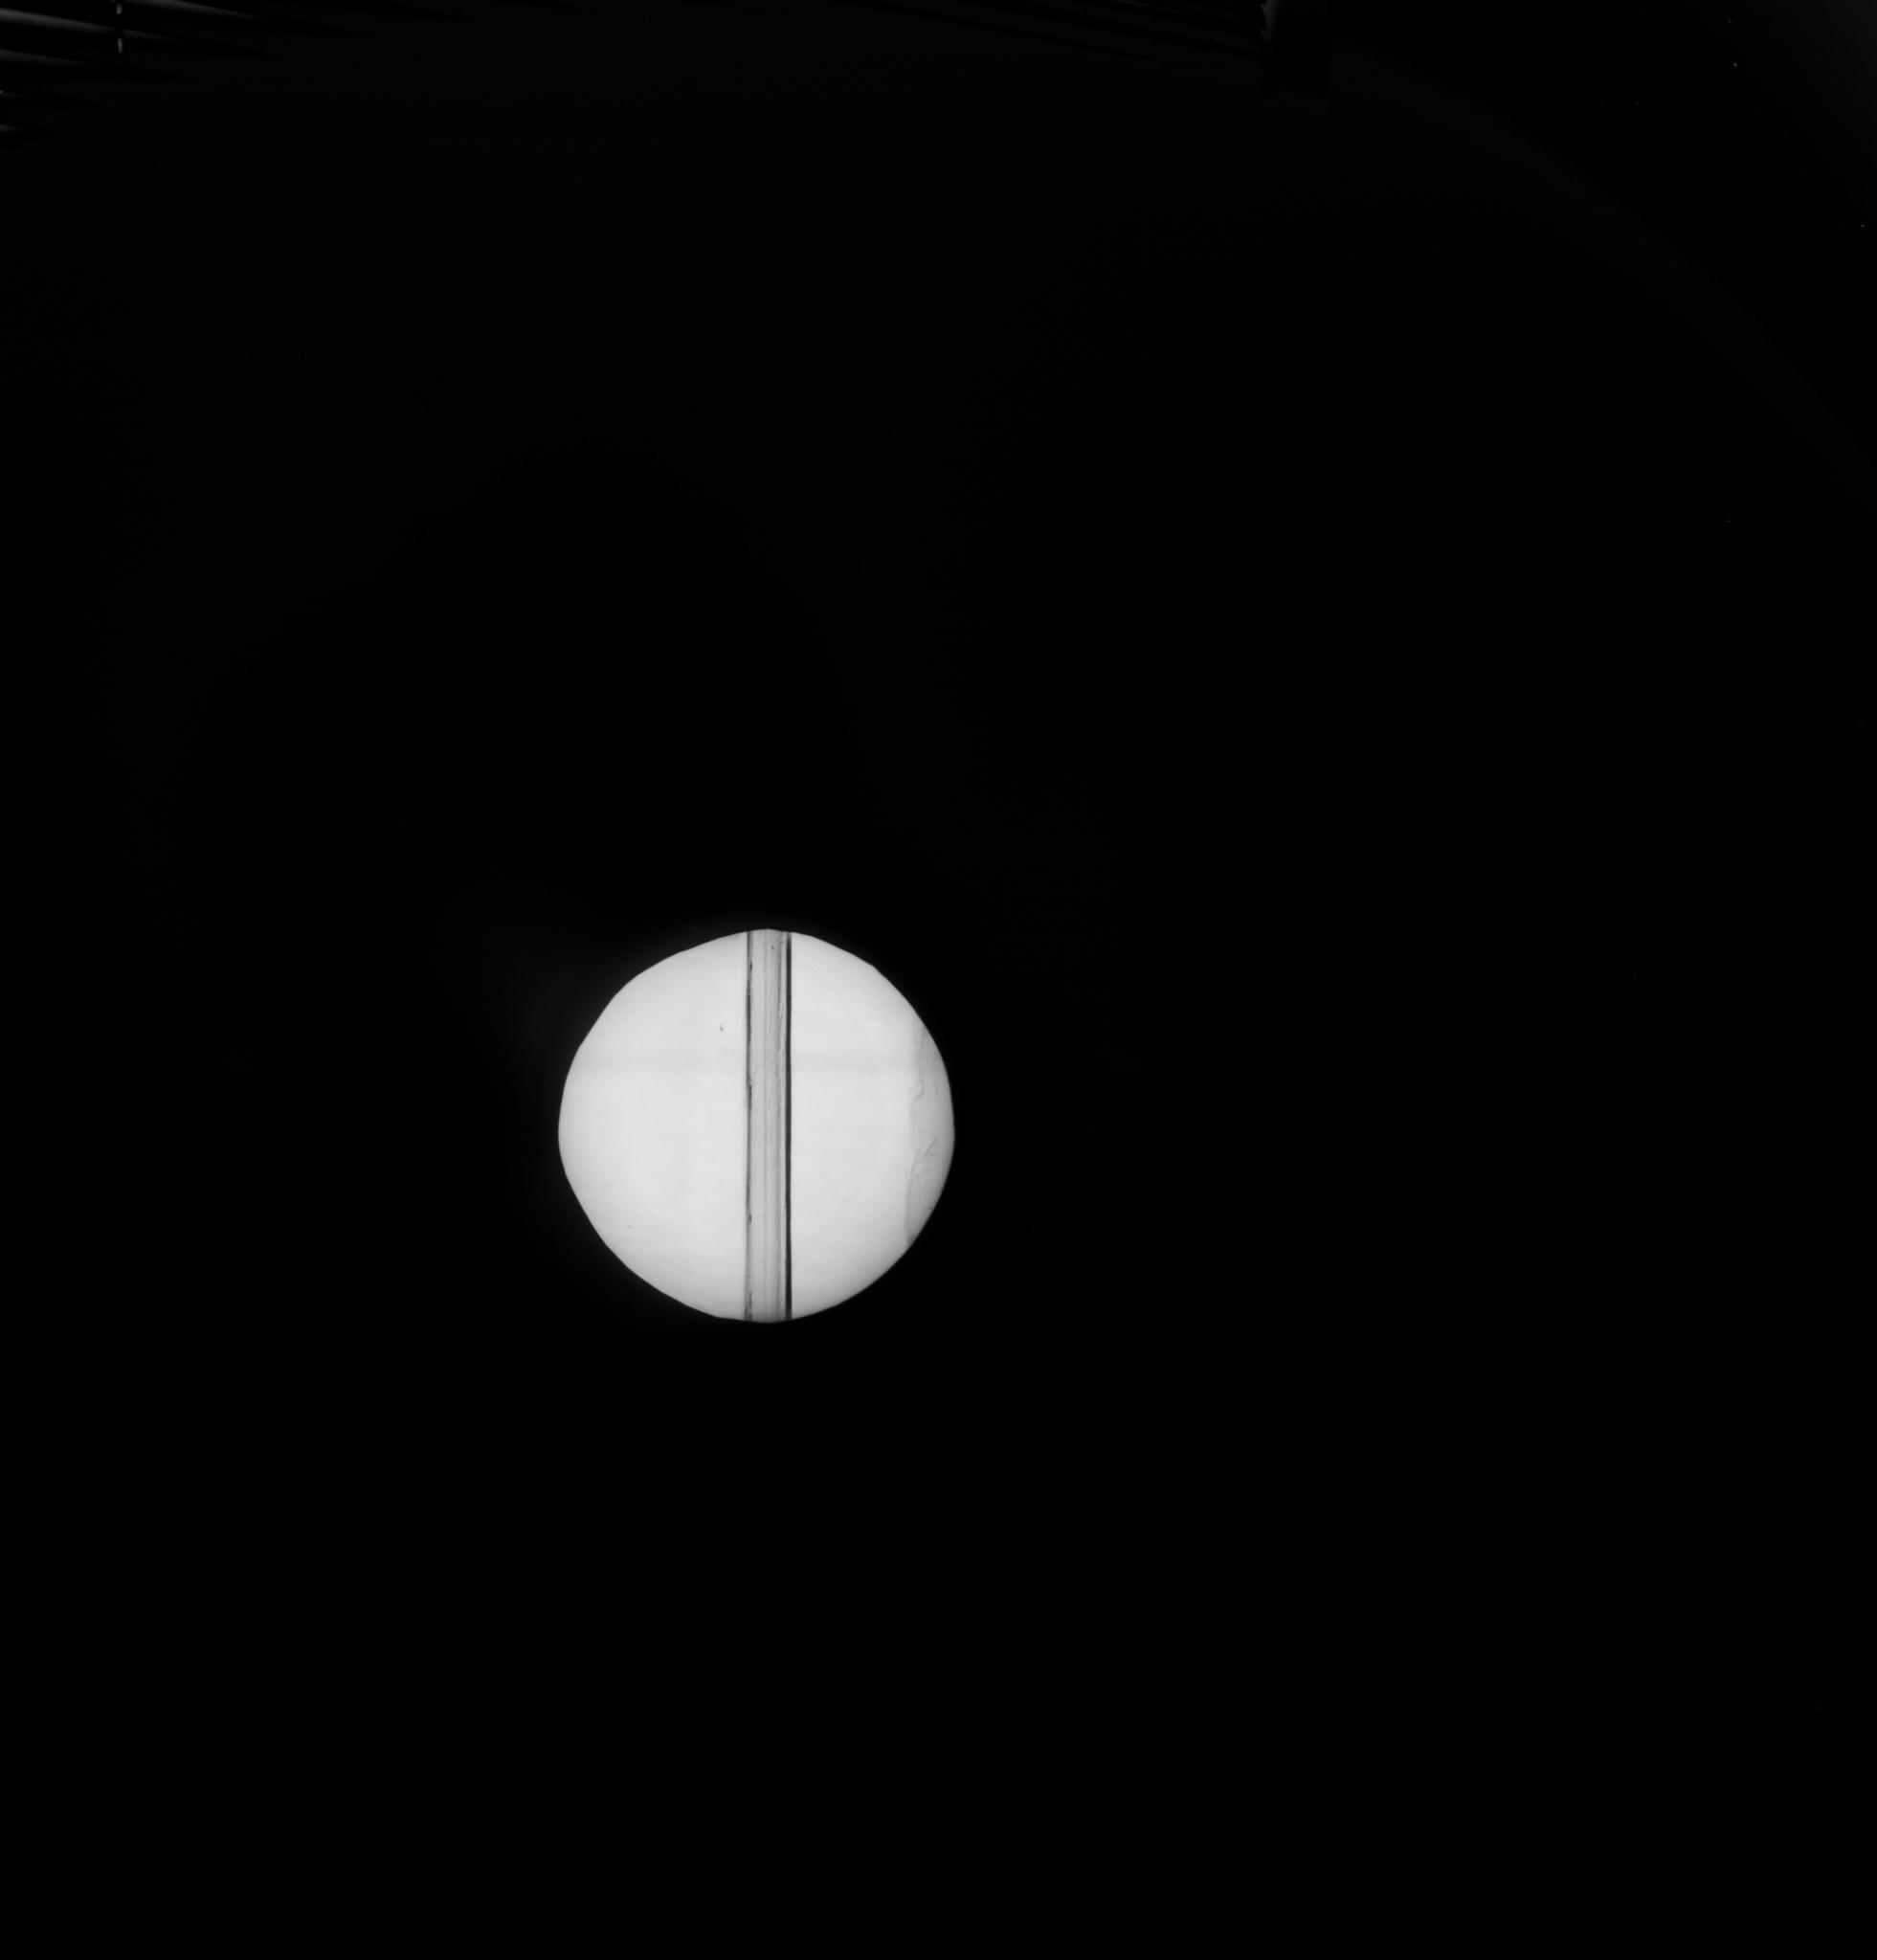 A circle of light in a black background